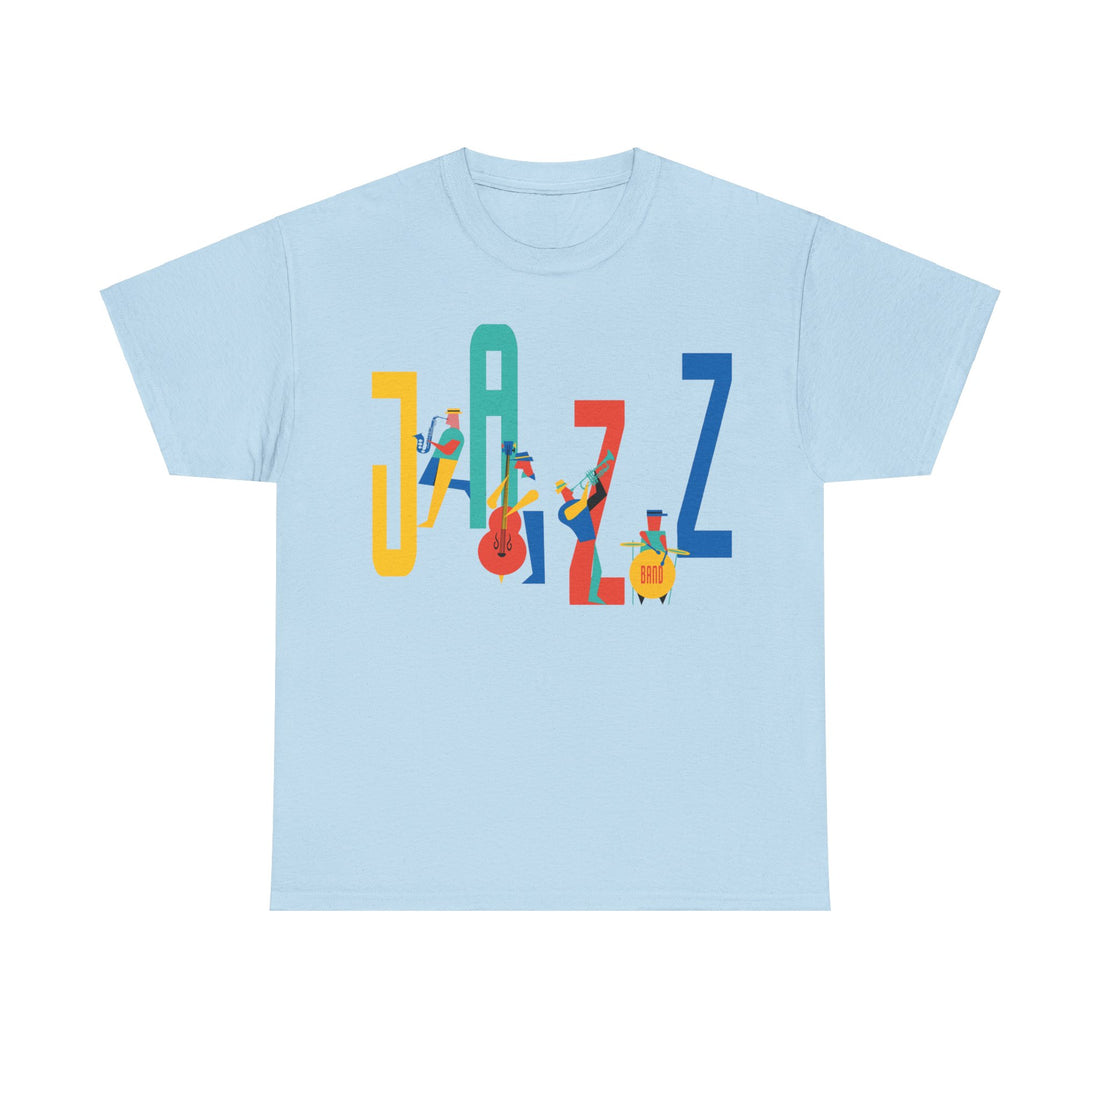 Multi colored Jazz t shirt with caricatured band members